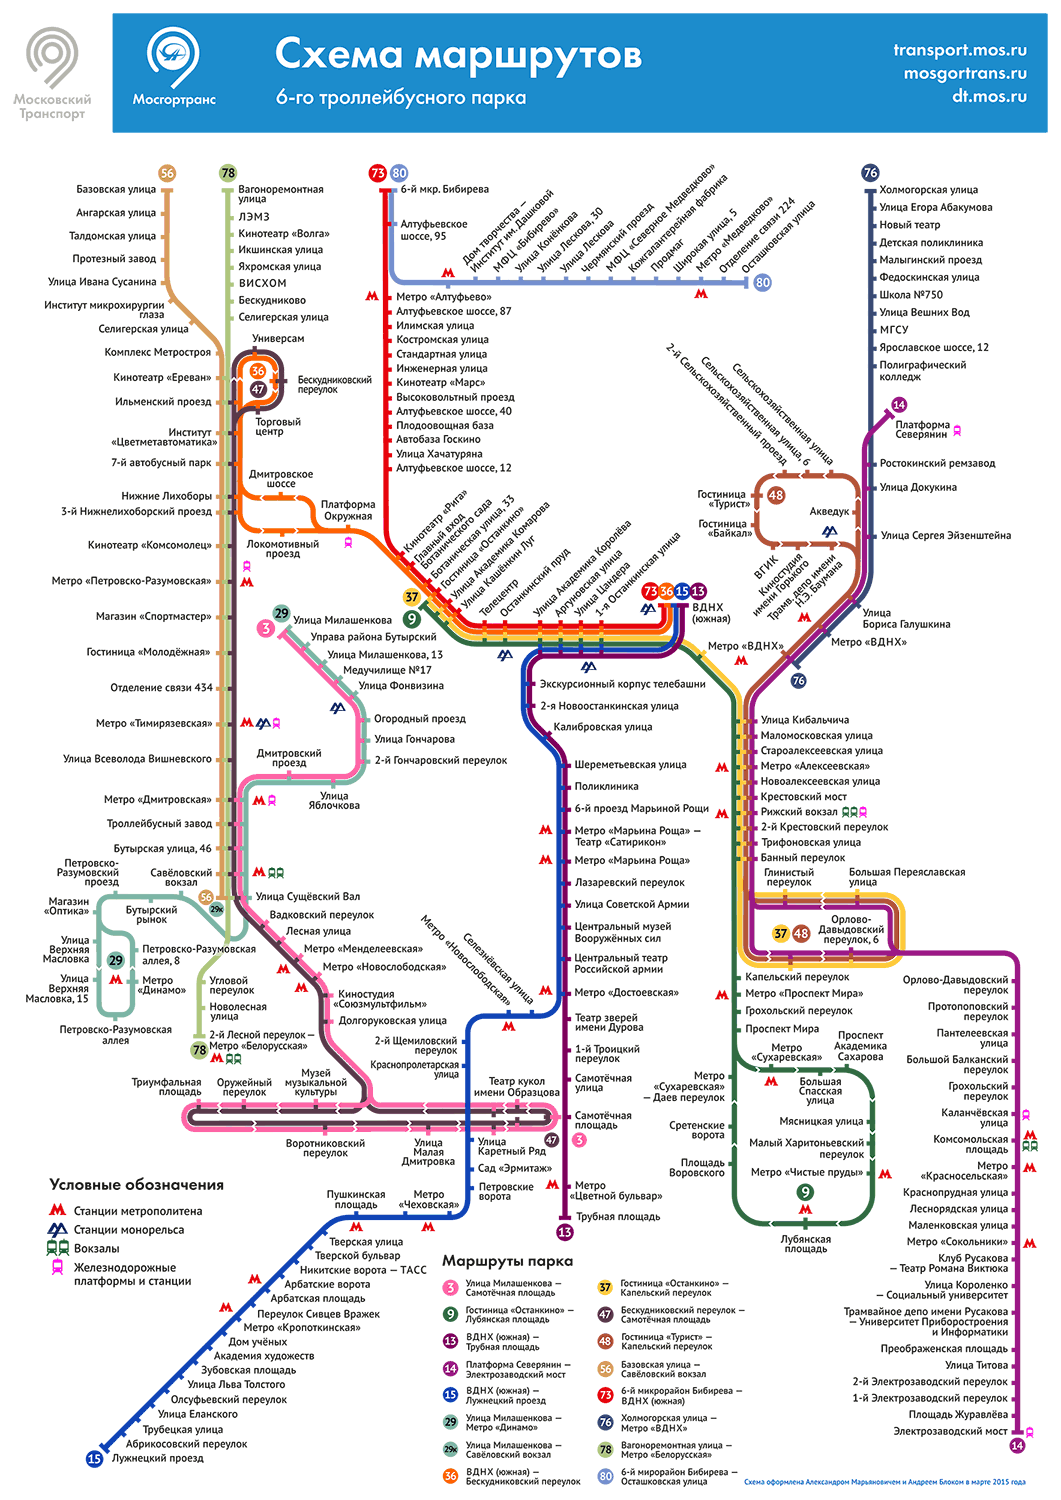 Moskwa — Individual Route Maps